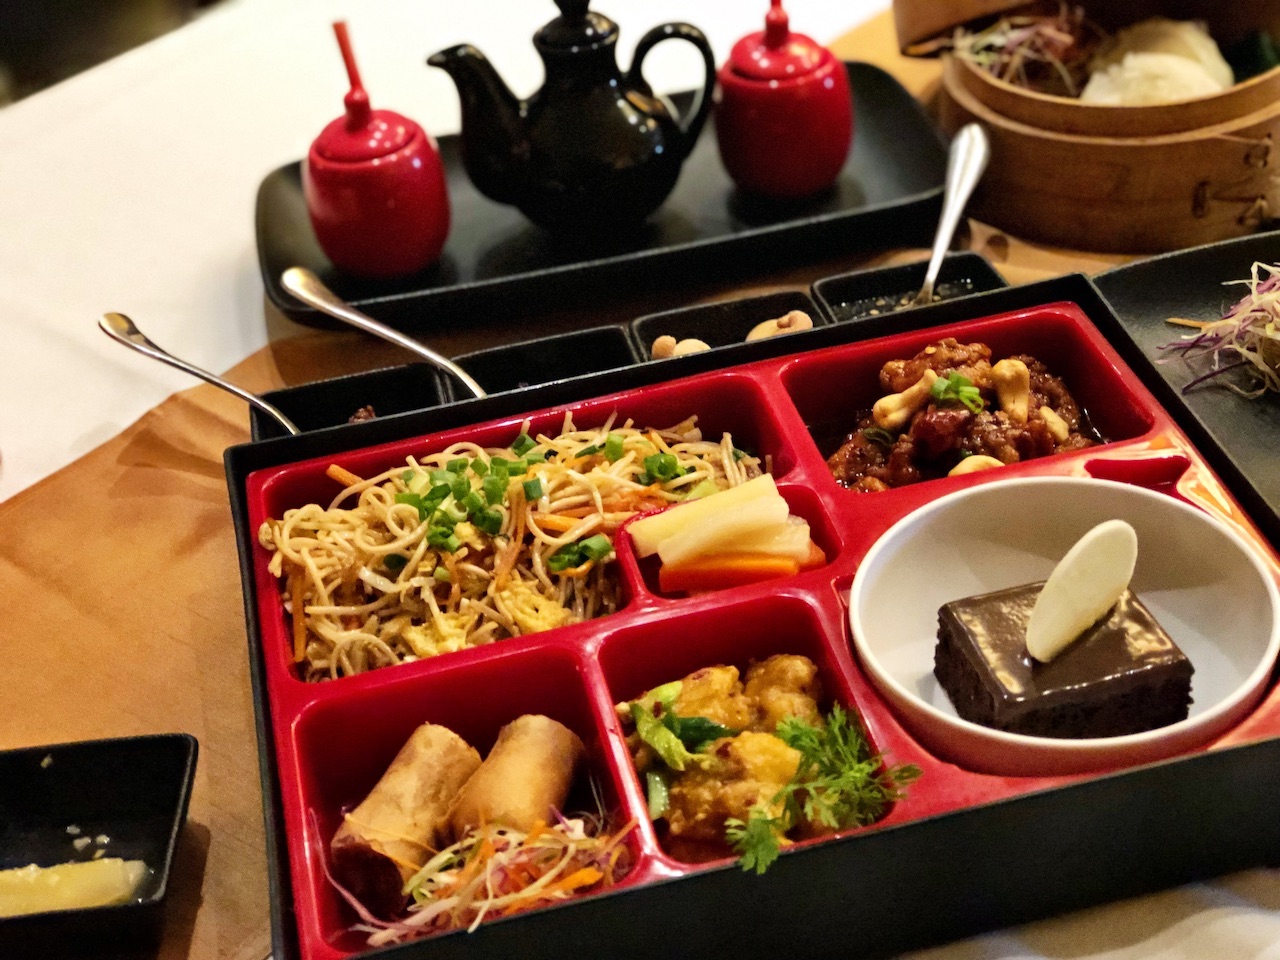 Eat To The Content Of Your Heart With BentoBox At Goa Marriott Resort & Spa